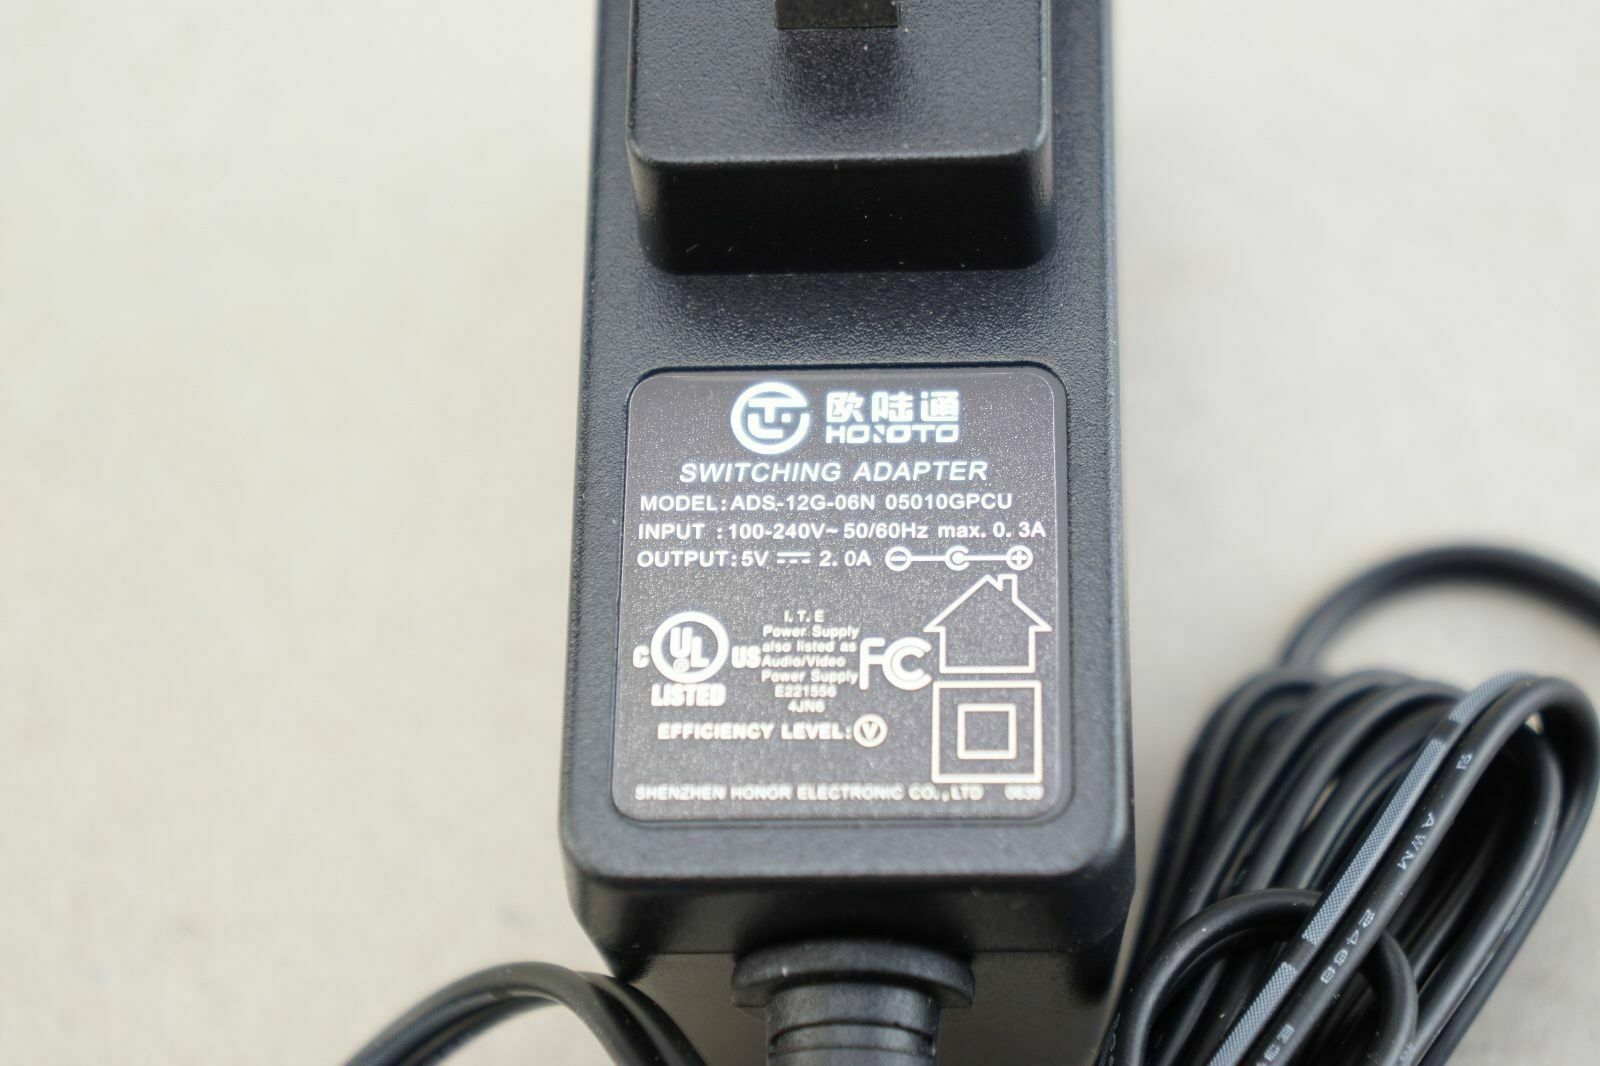 New Honor ADS-12G-06 05010GPCU AC DC Power Supply 5V 2A Adapter Charger - Click Image to Close